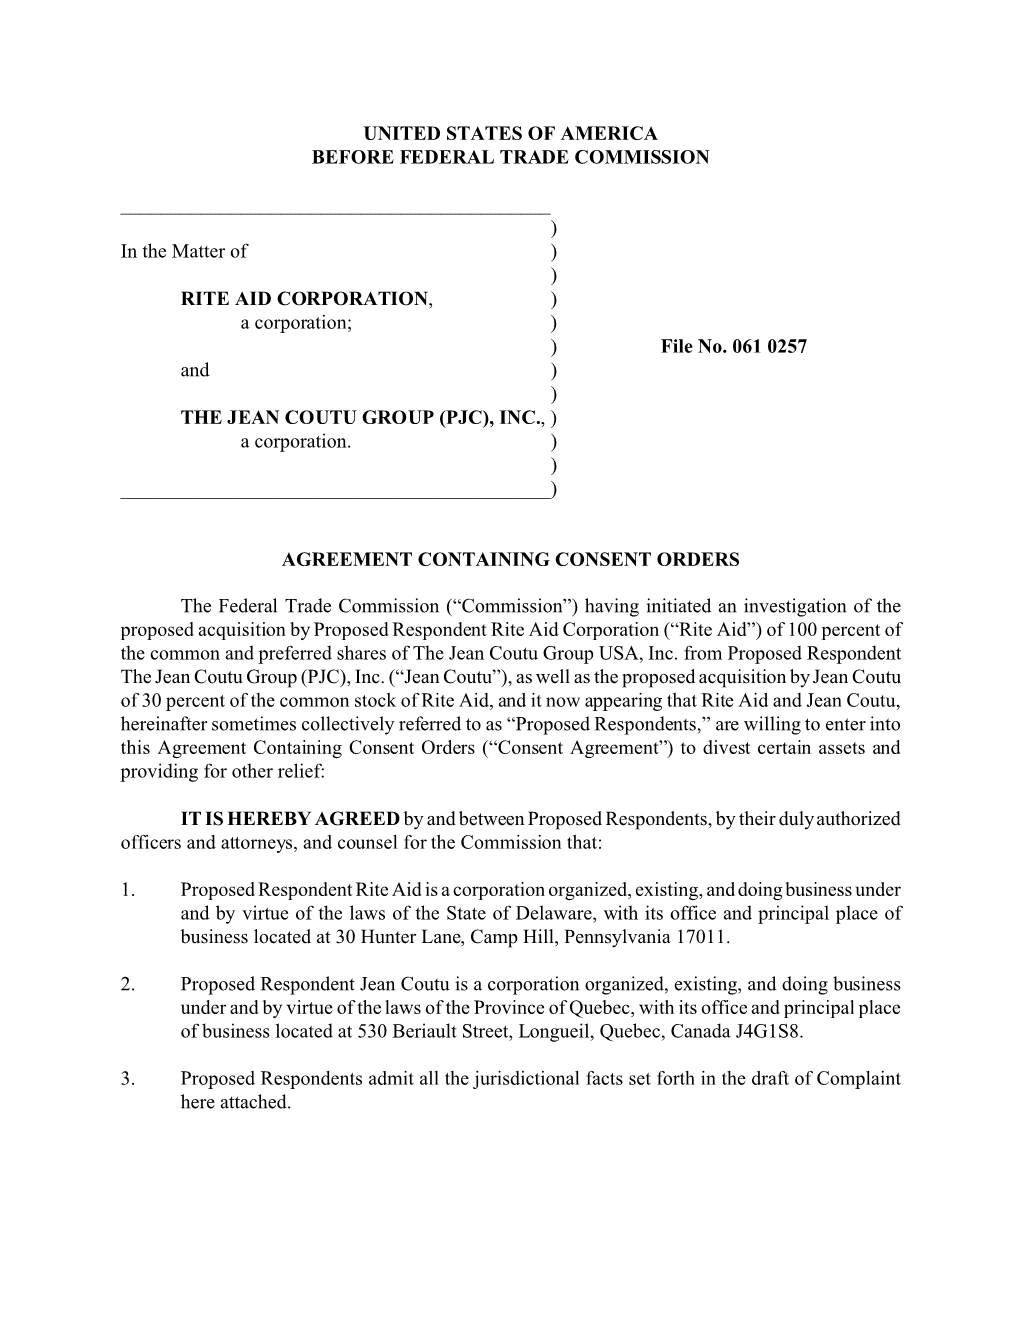 Agreement Containing Consent Orders